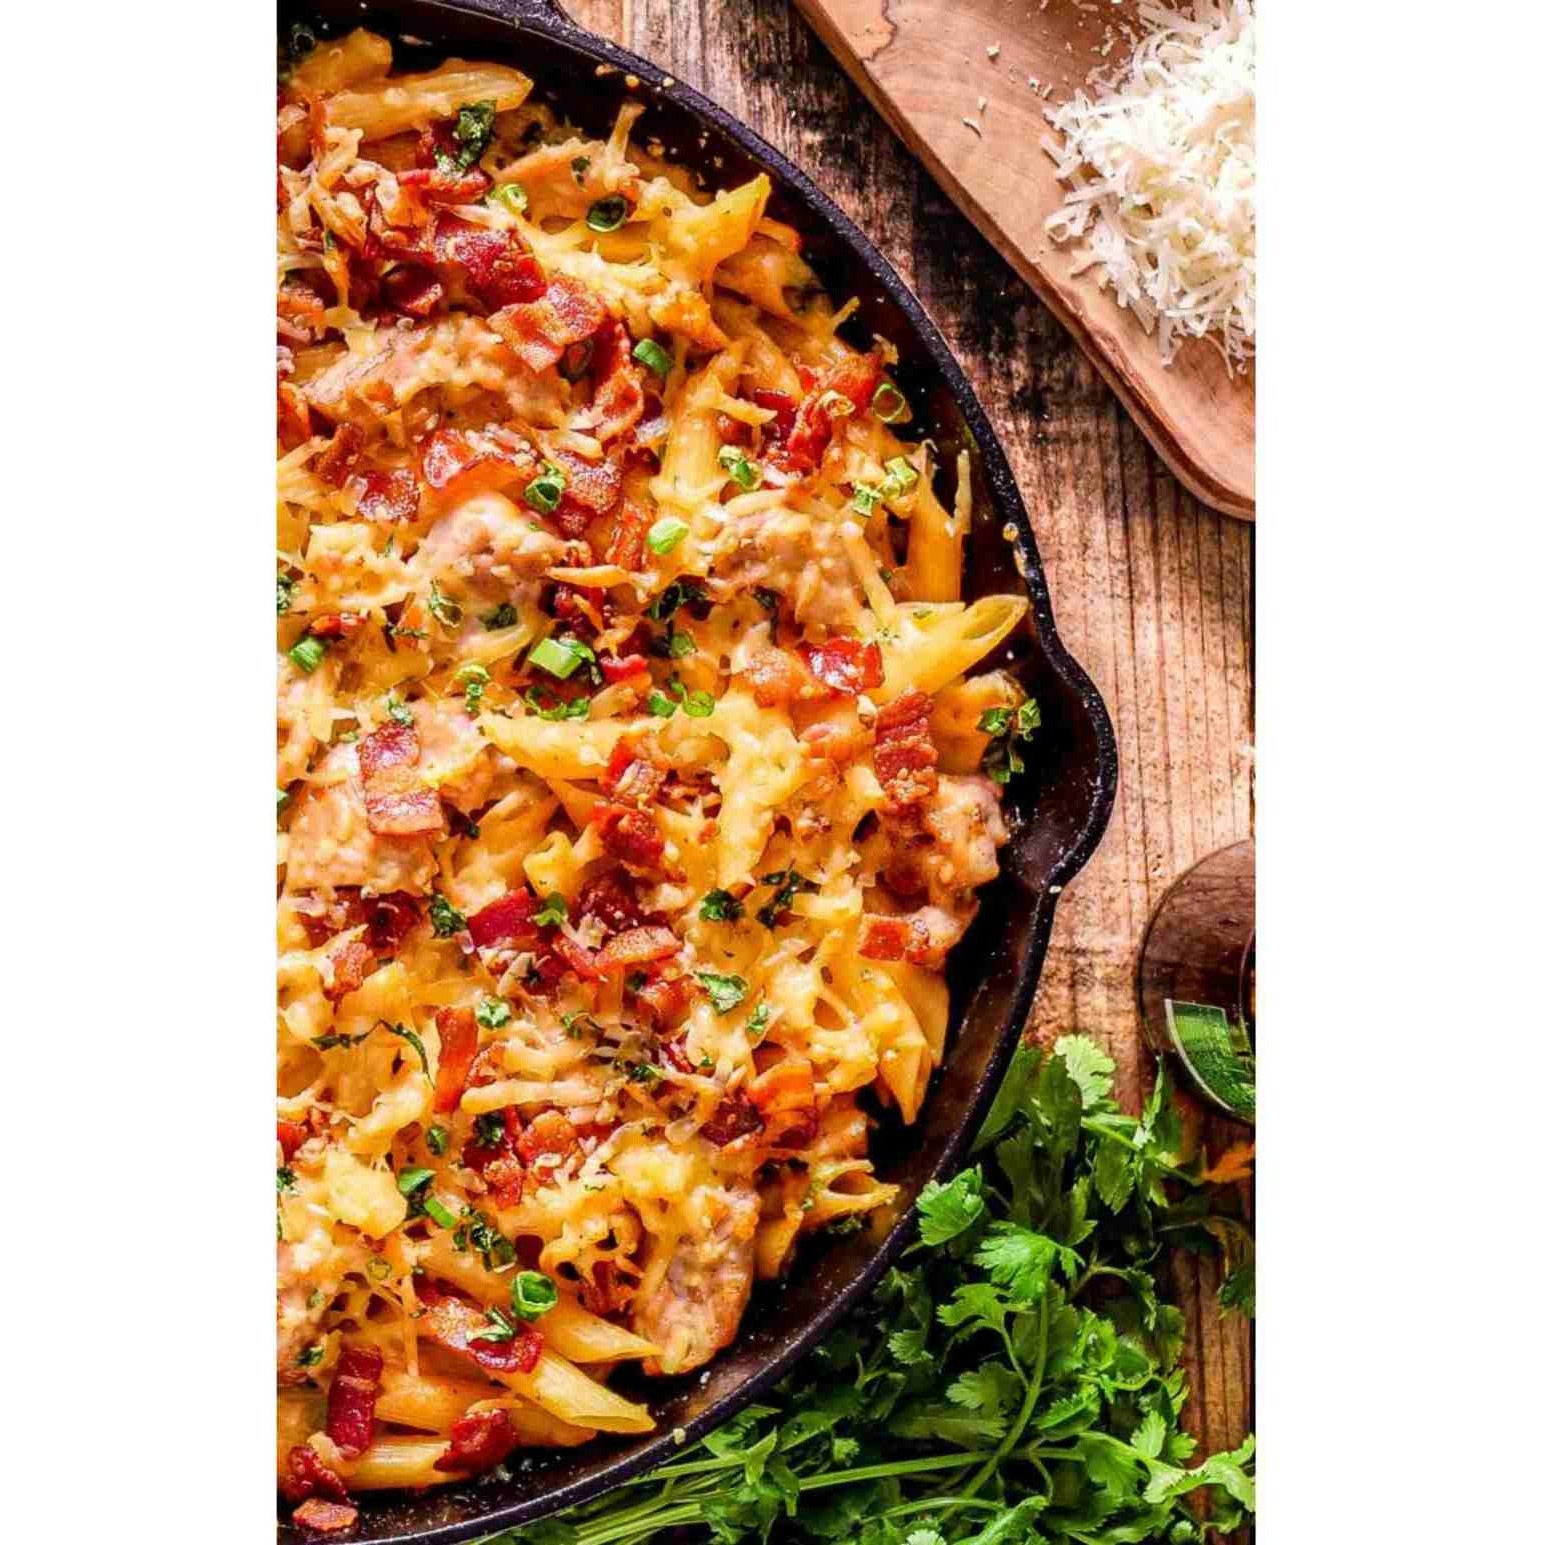 Monterey BBQ Chicken Skillet Meal with pasta included - Kitcheneez Mixes & More!